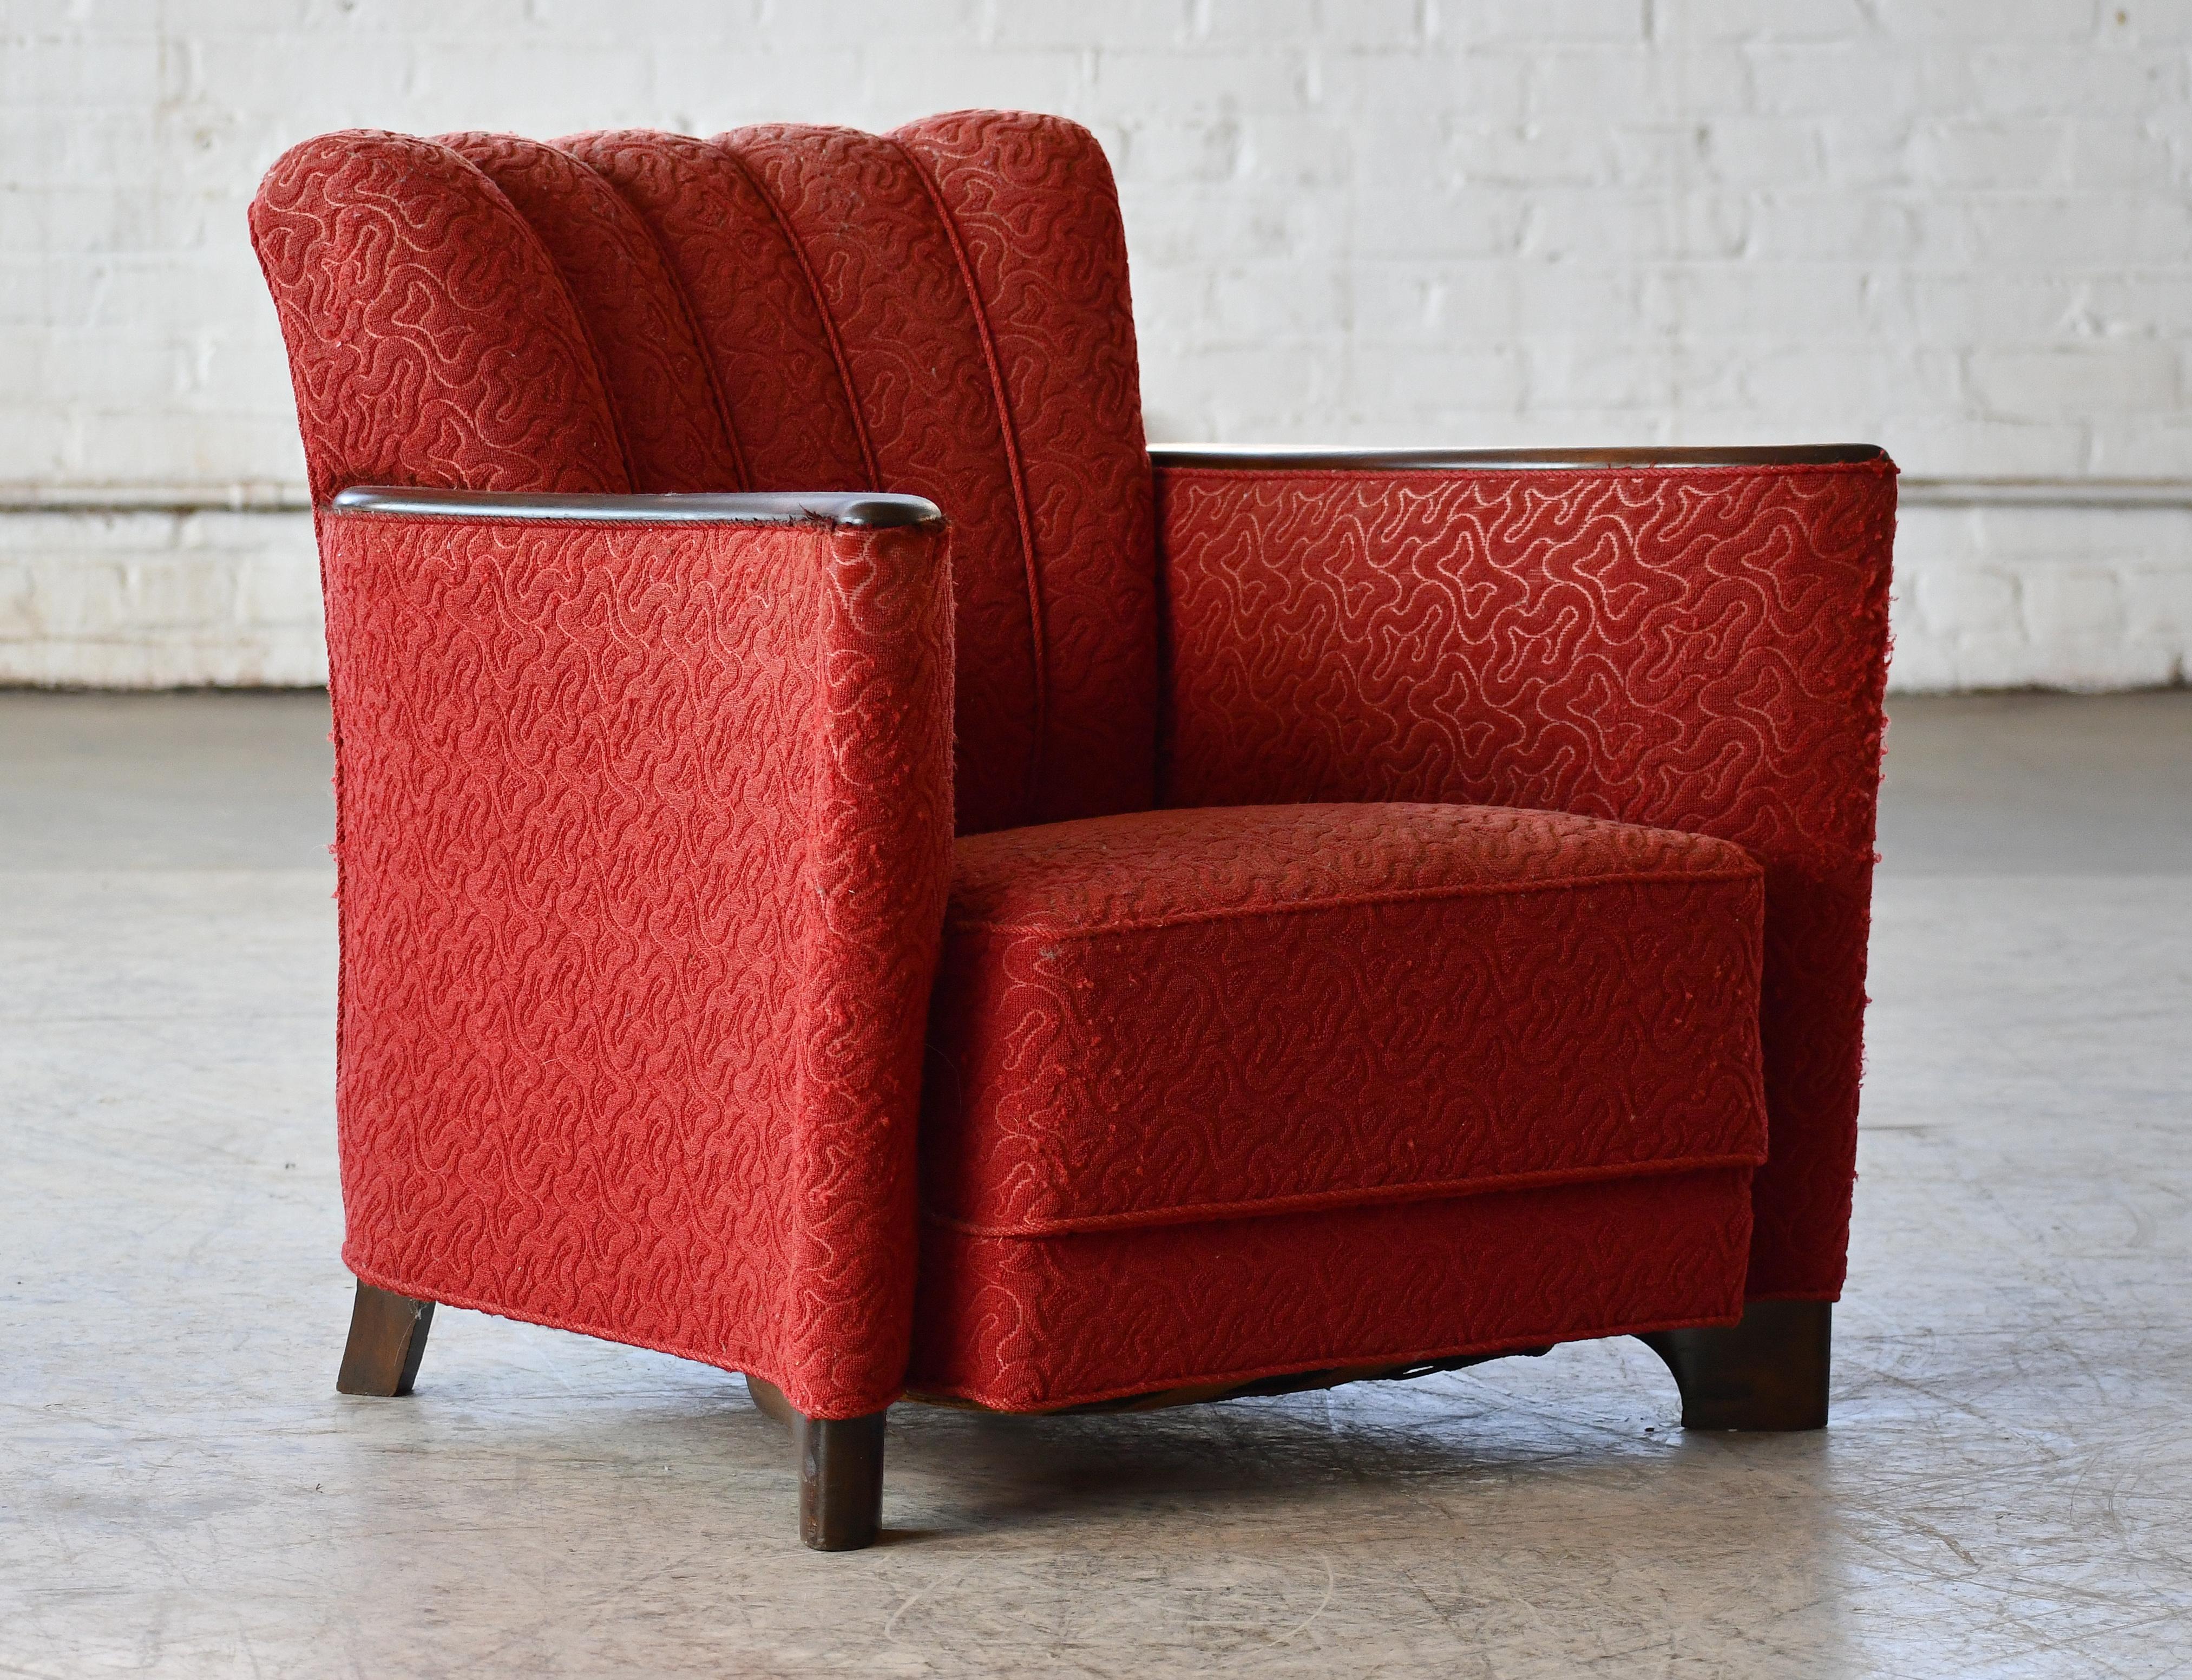 Wool Danish 1930s Art Deco Lounge Chair in Red Mohair with Mahogany Accents For Sale